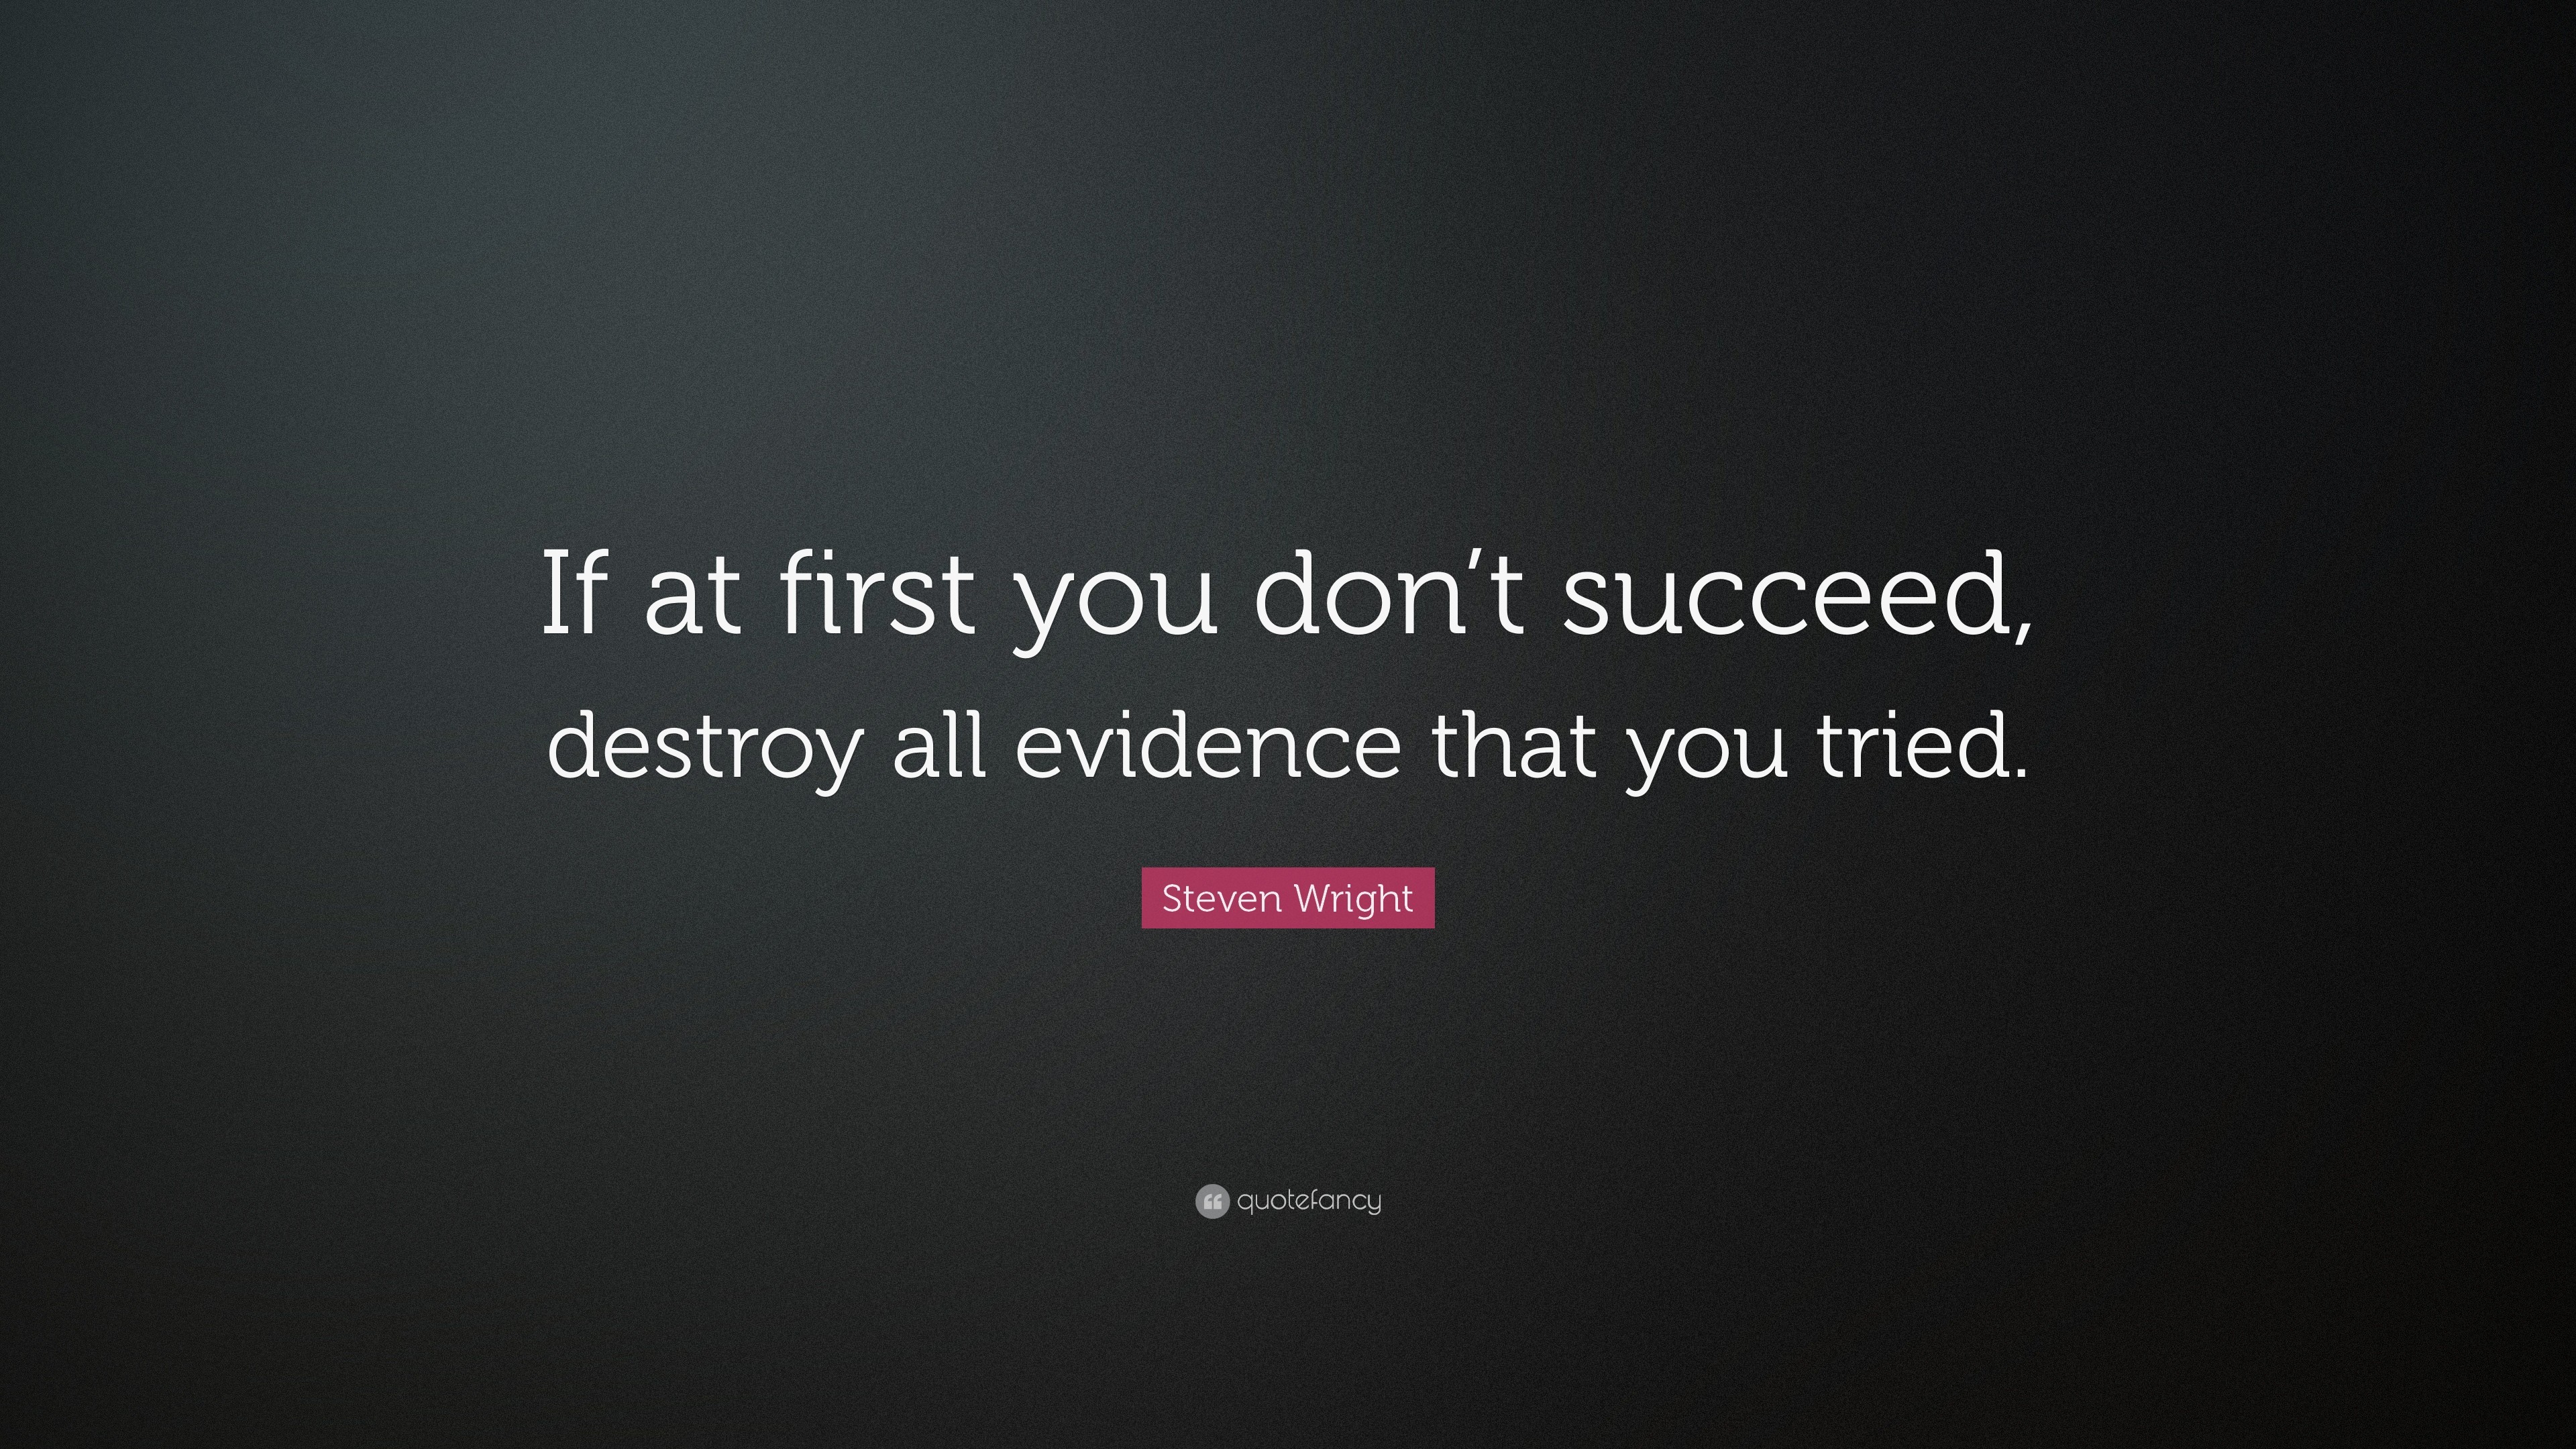 3840x2160 Funny Quotes: “If at first you don't succeed, destroy all evidence